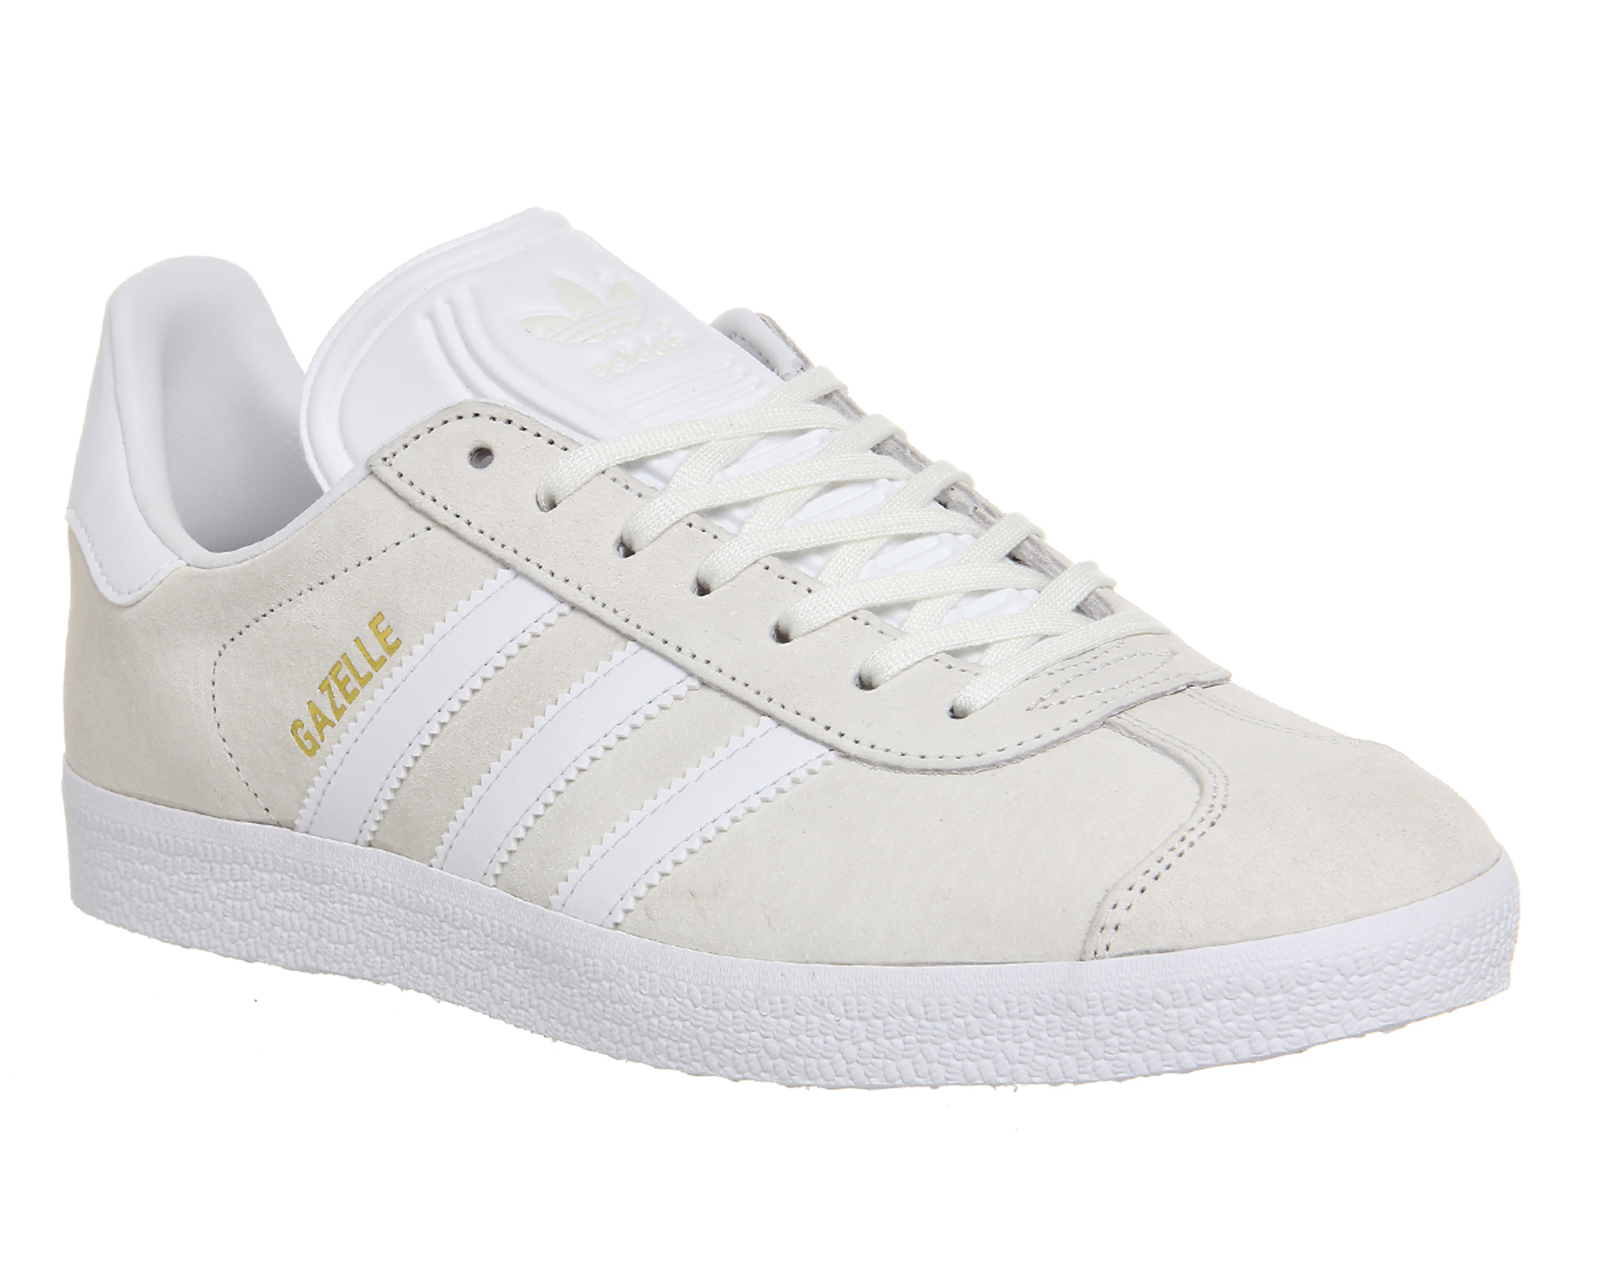 Adidas Gazelle Off White - His trainers